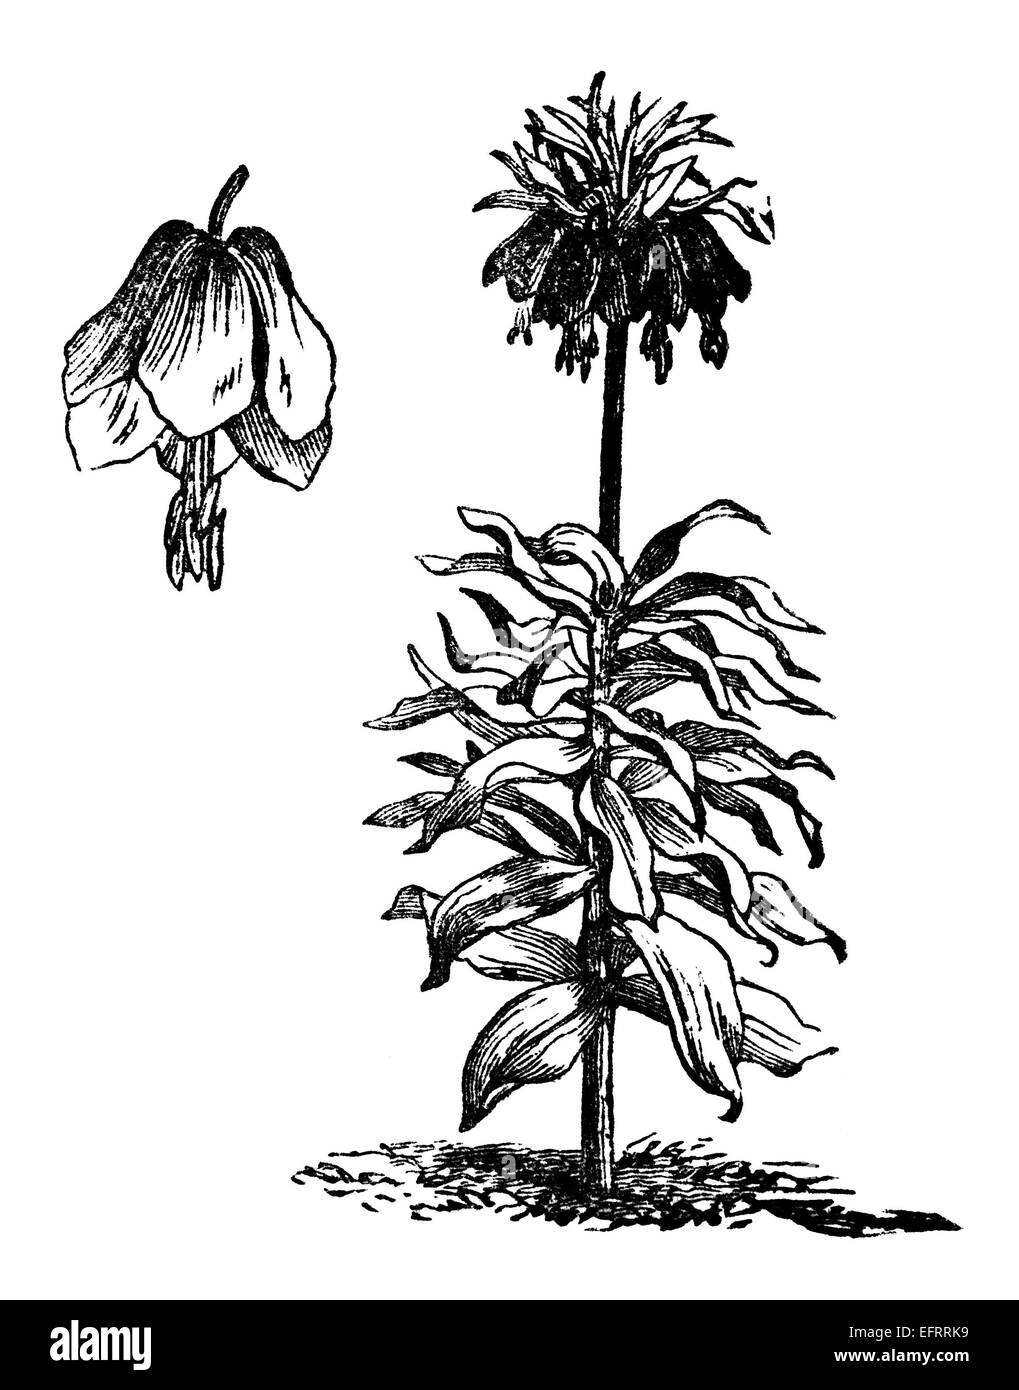 Victorian engraving of a crown imperial flower. Digitally restored image from a mid-19th century Encyclopaedia. Stock Photo